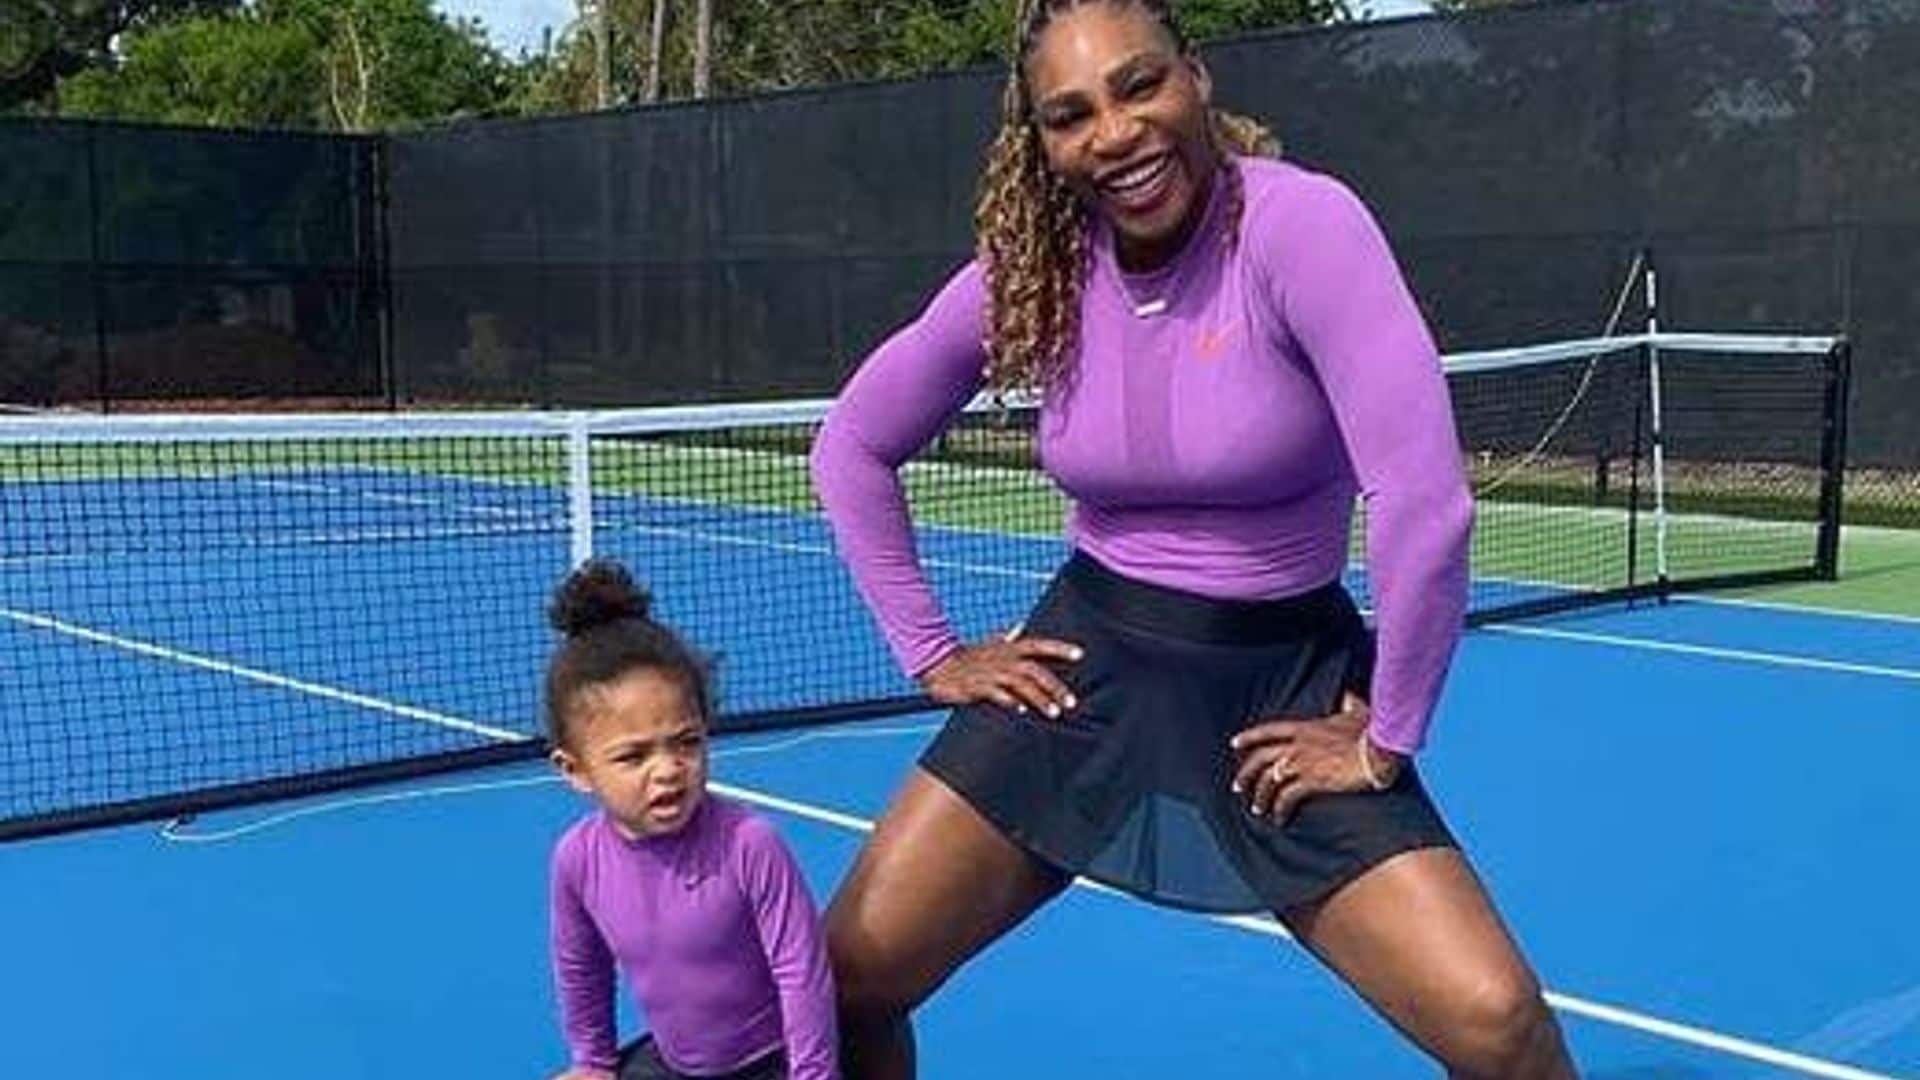 Serena Williams and daughter Olympia take twinning to a new level on the tennis court